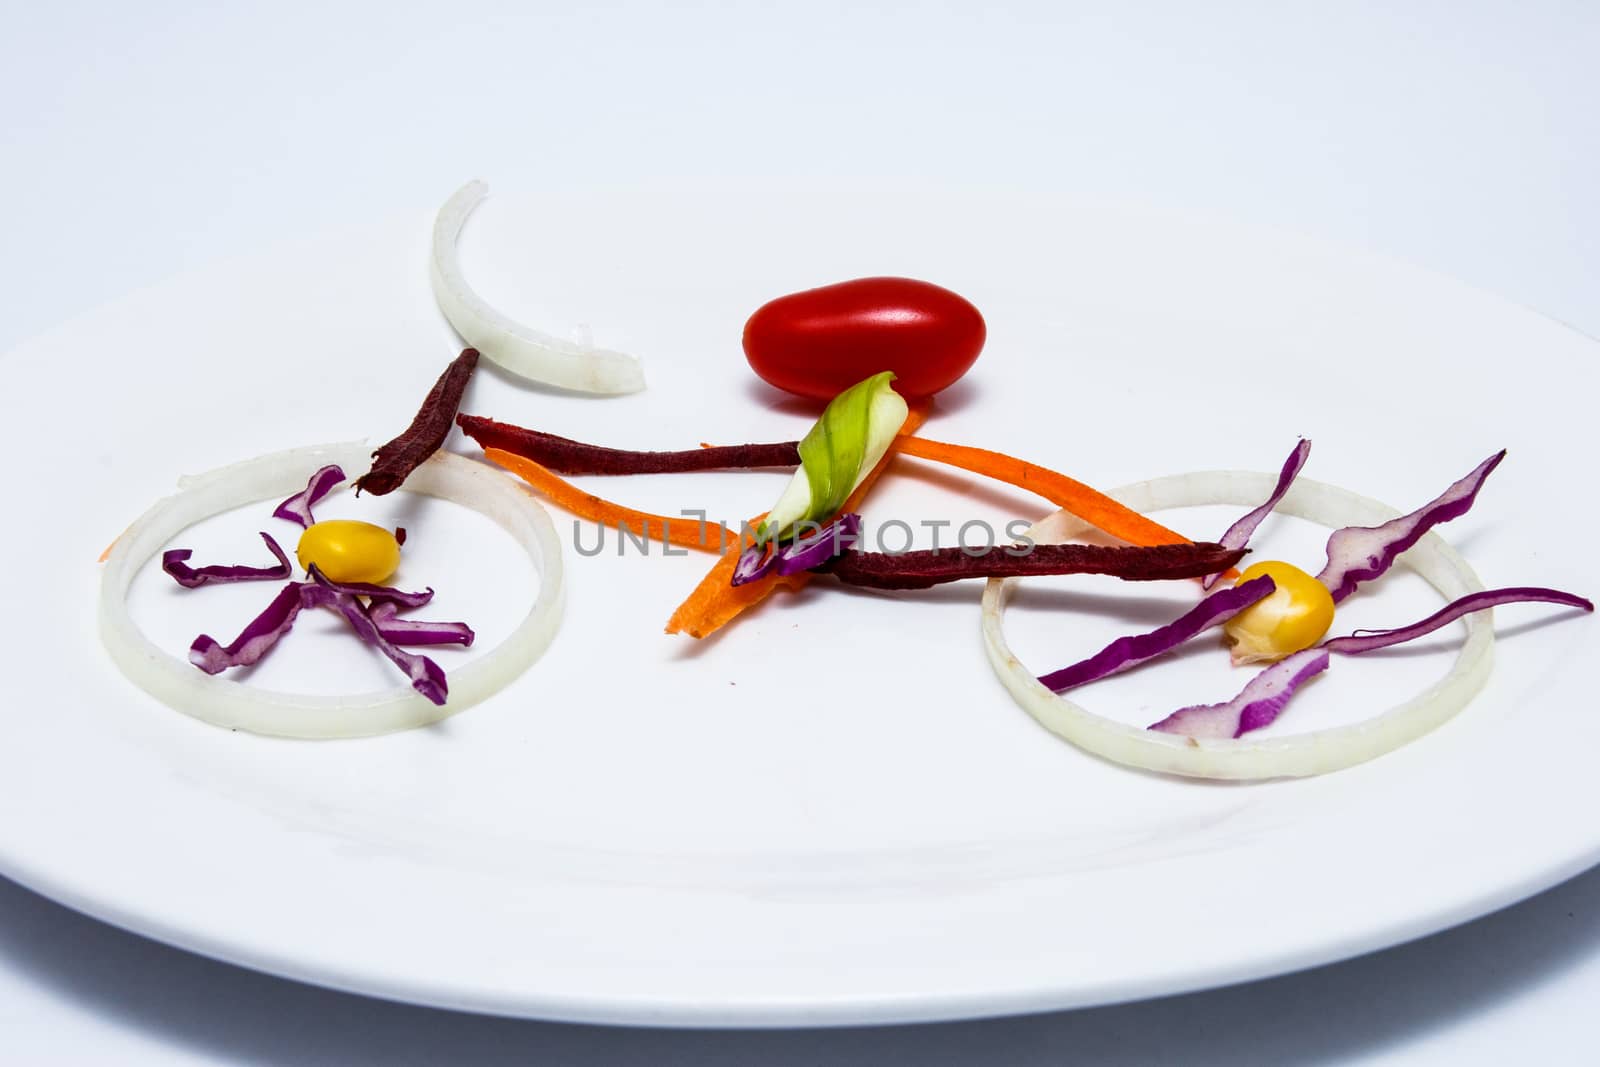 Sliced vegetables in form of a bicycle on dish by kannapon